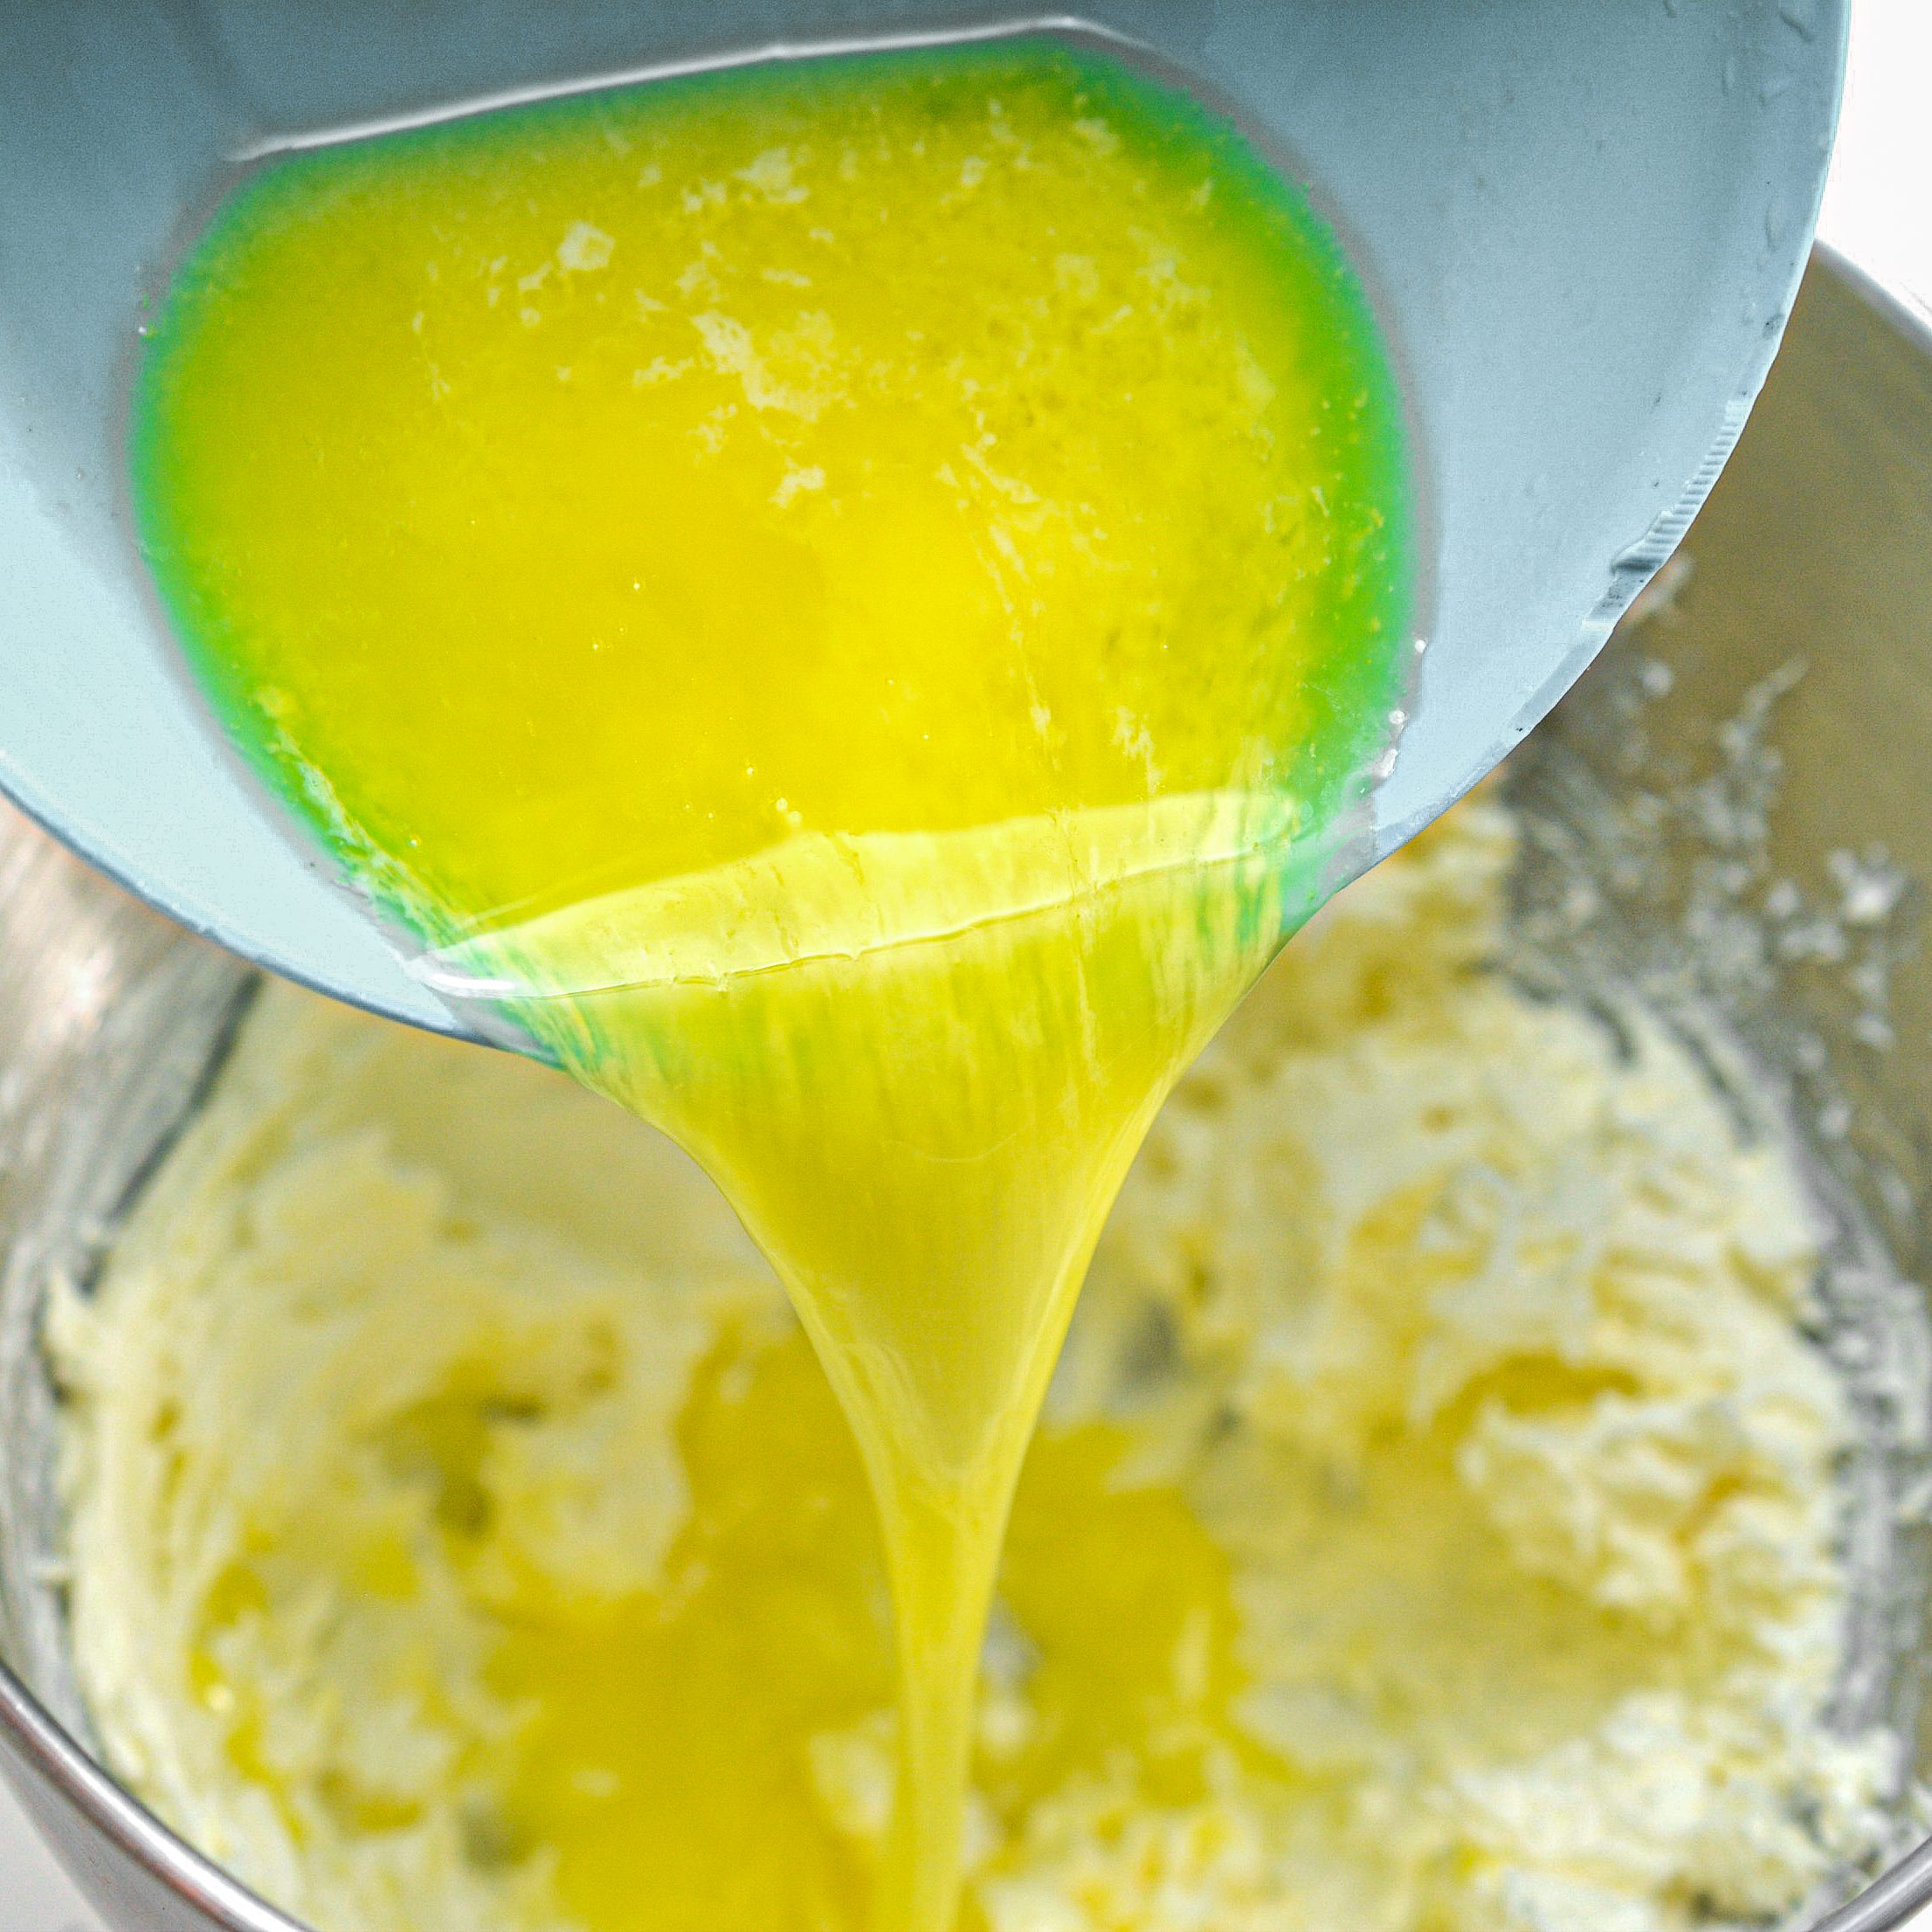 Add the melted butter to the cream cheese, and blend again until smooth and creamy.